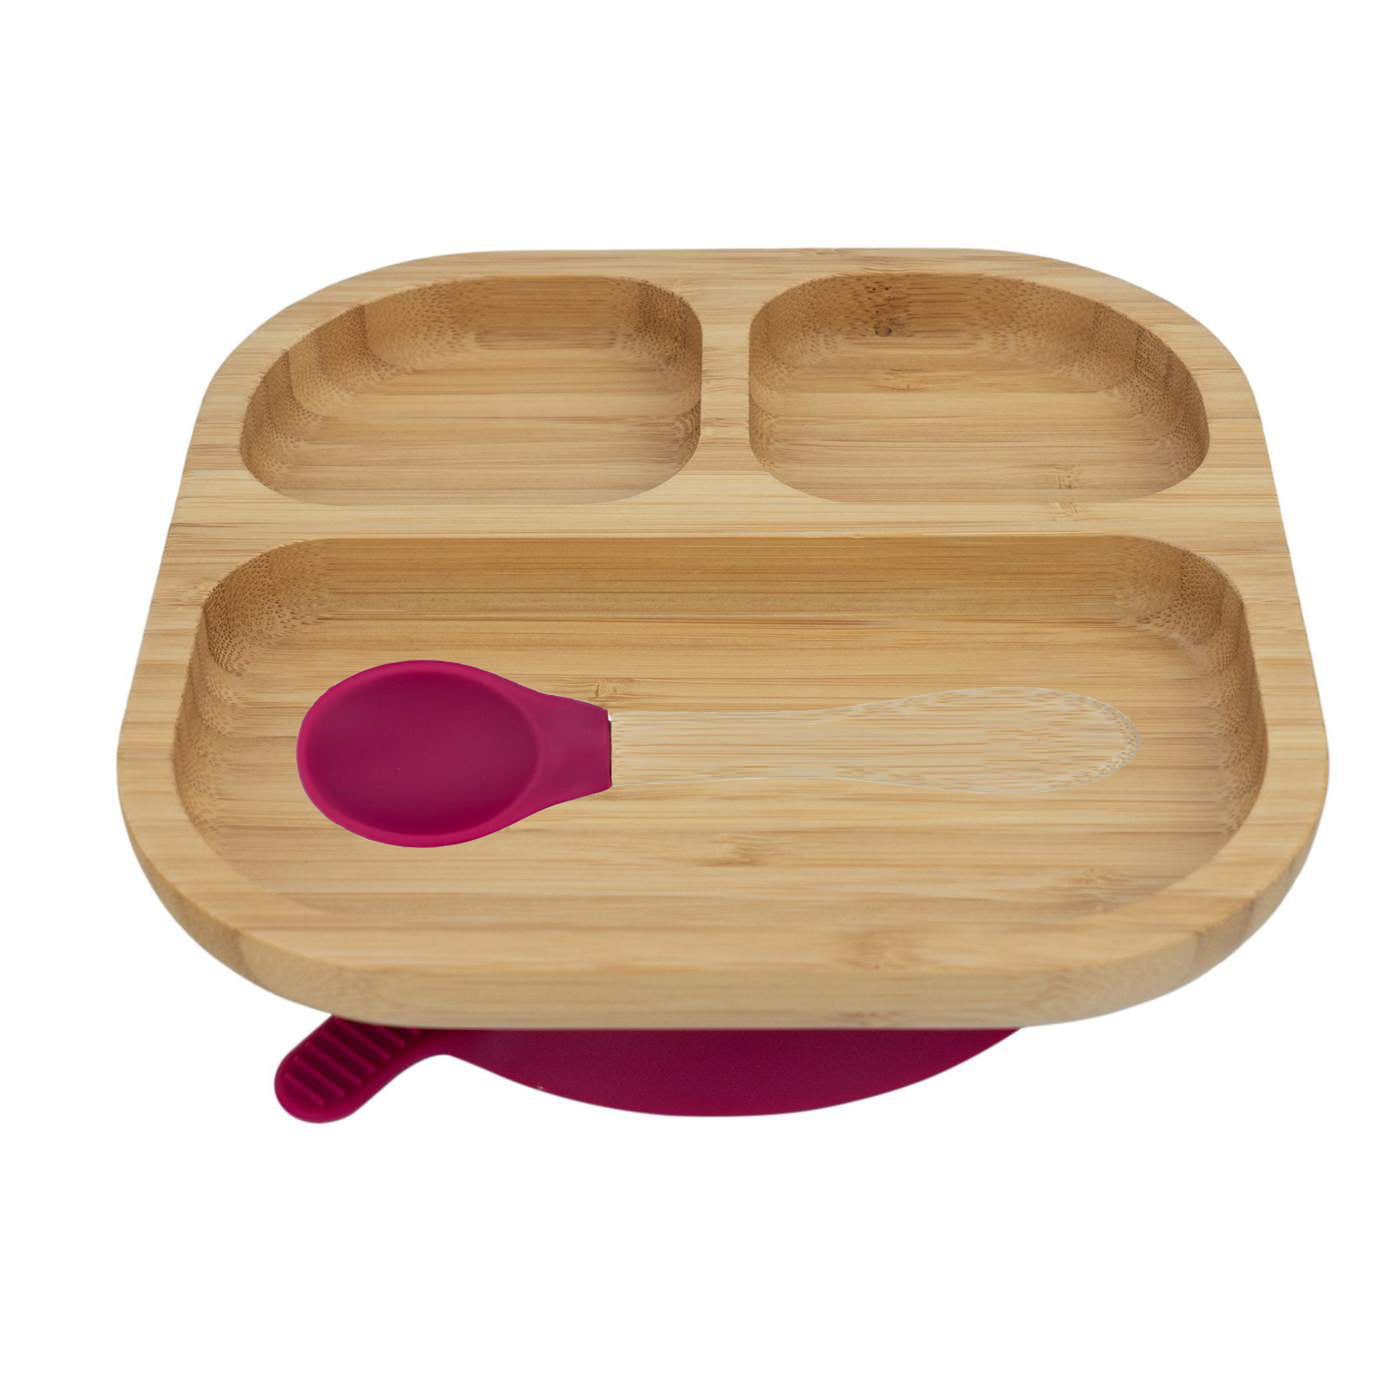 Personalised Wooden Tiny Dining Bamboo Plate with suction cup and Spoon - Majenta Red - By Babba Box | Babba box.